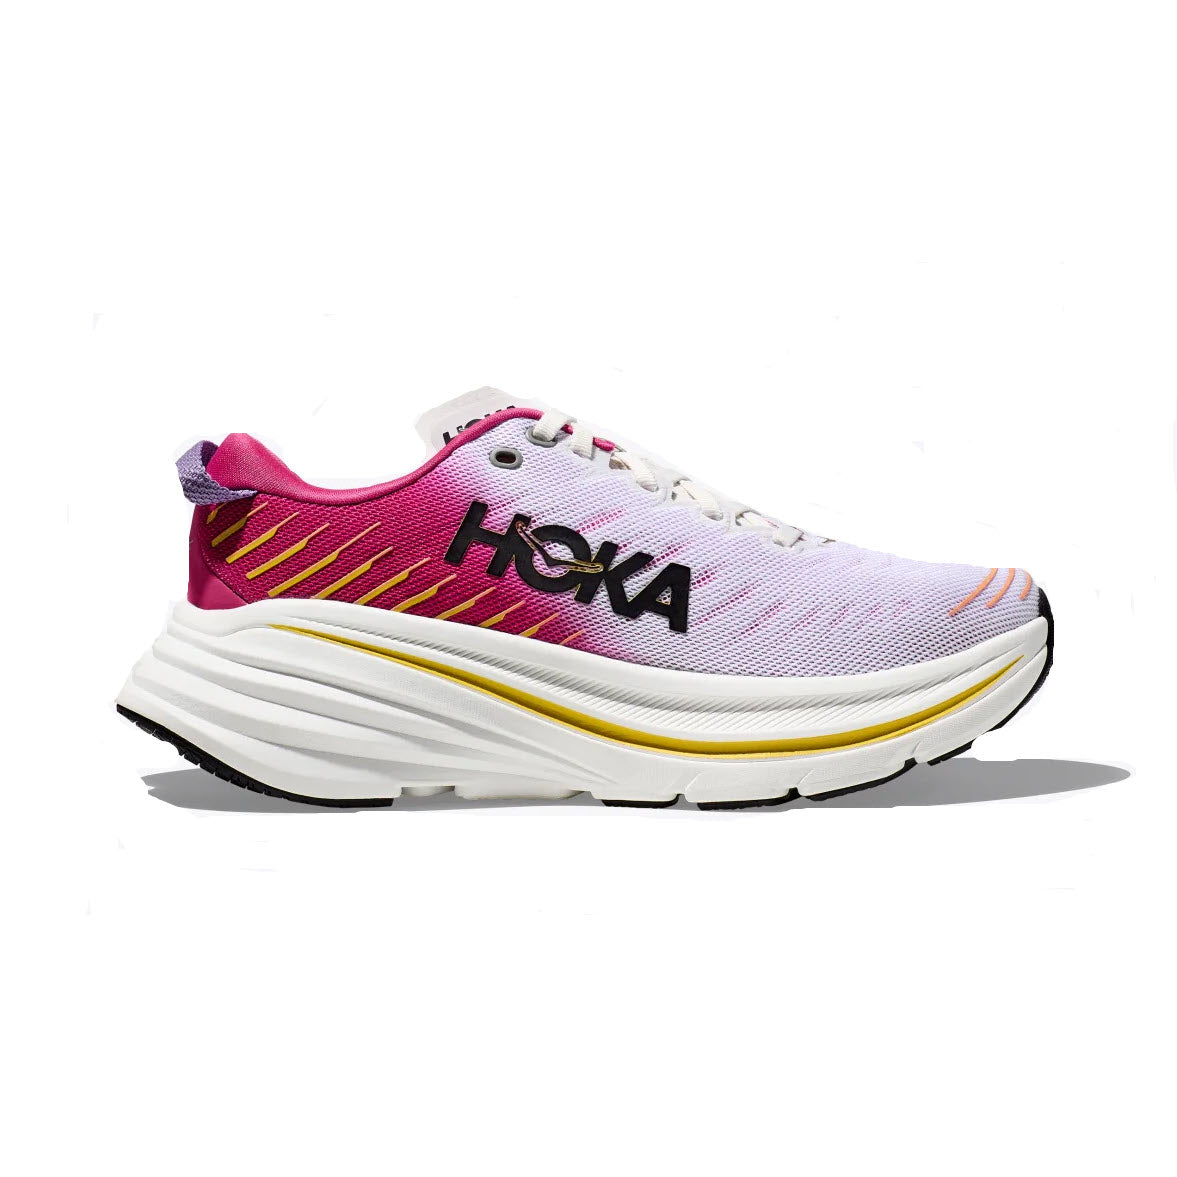 A Hoka Bondi X Blanc/Yarrow running shoe with a white and pink upper and thick white sole, featuring enhanced cushioning, isolated on a white background.